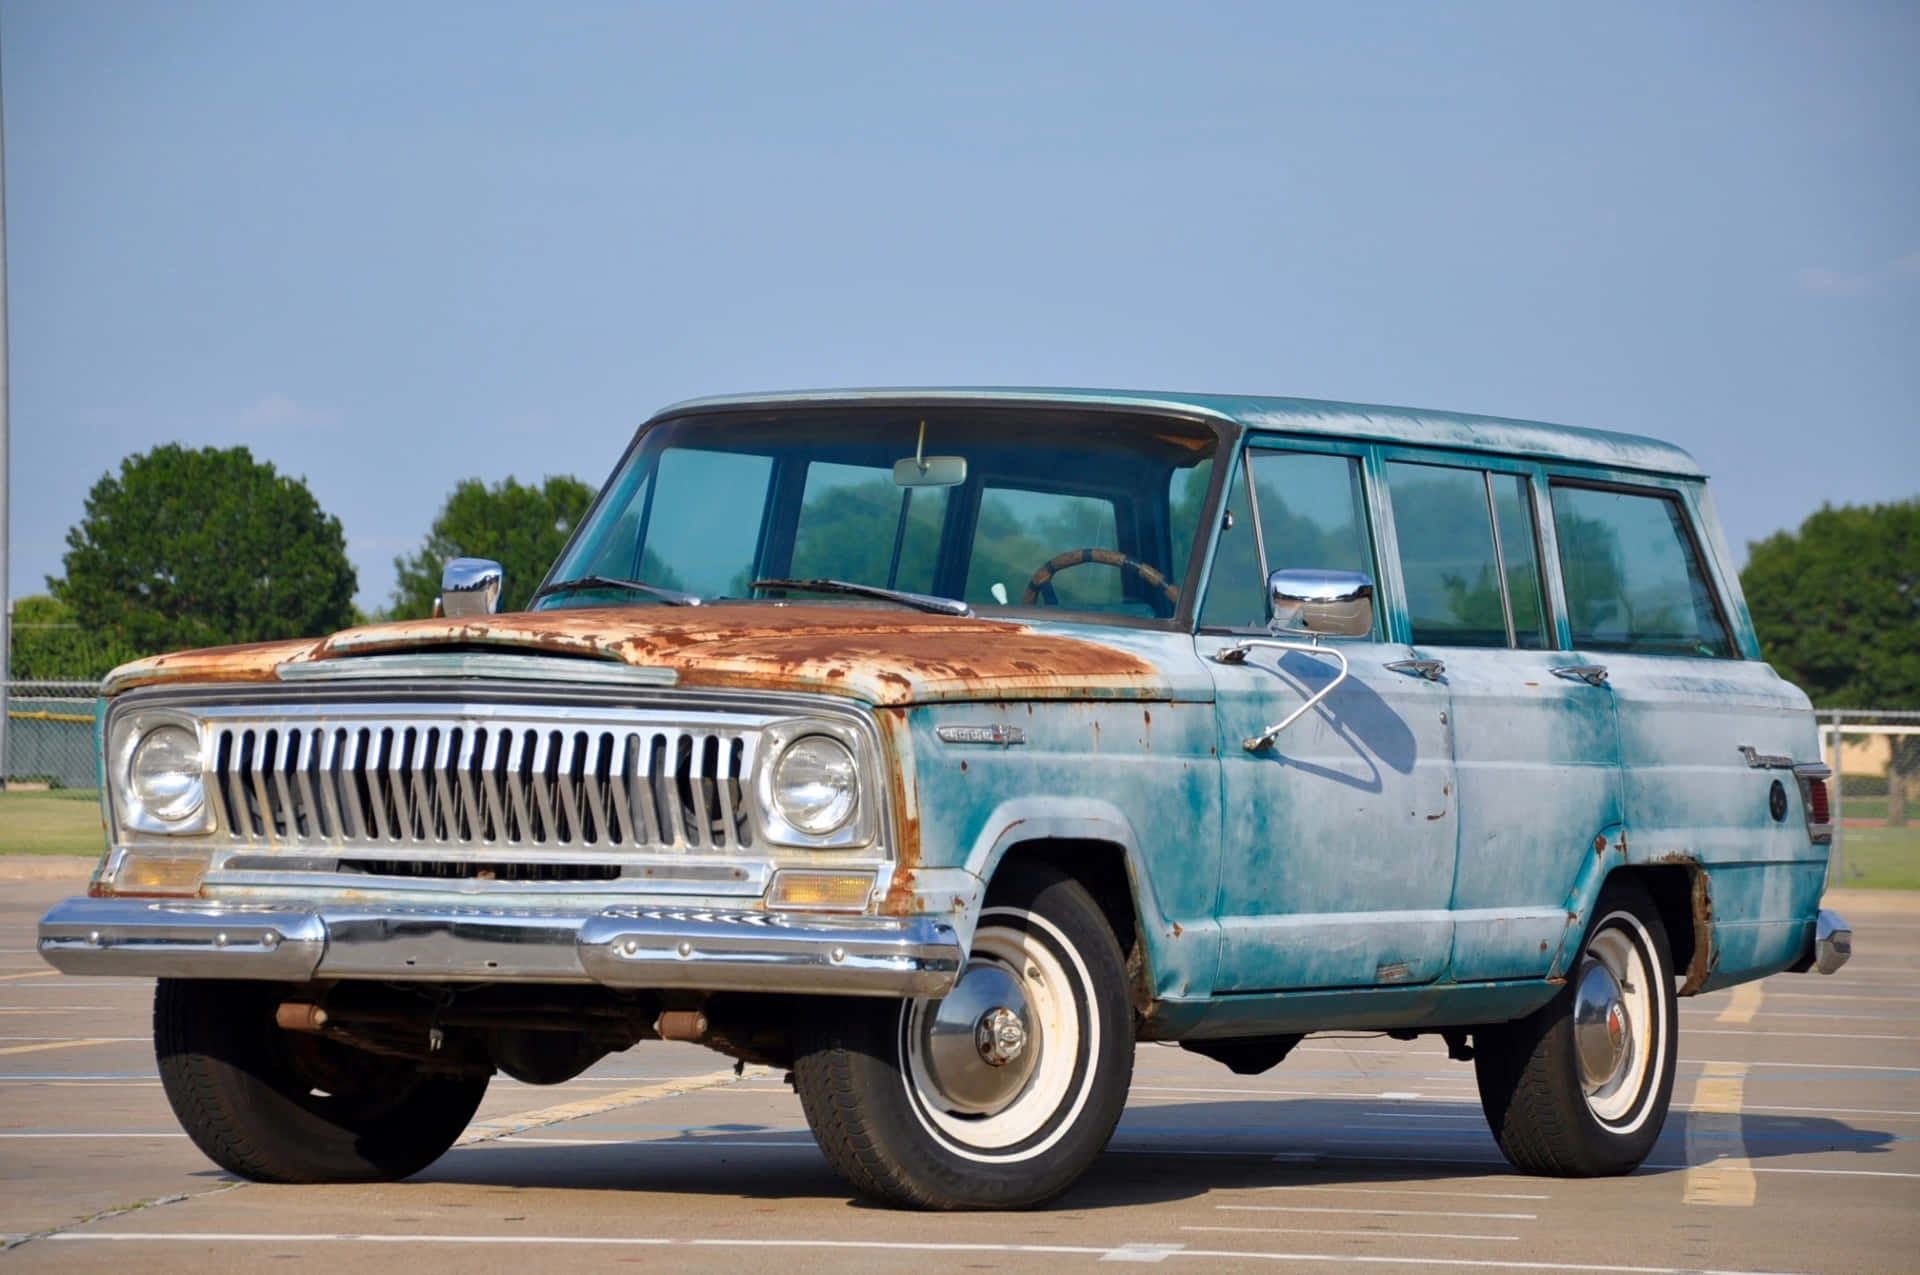 Captivating Off-road Adventure with the Jeep Wagoneer Wallpaper